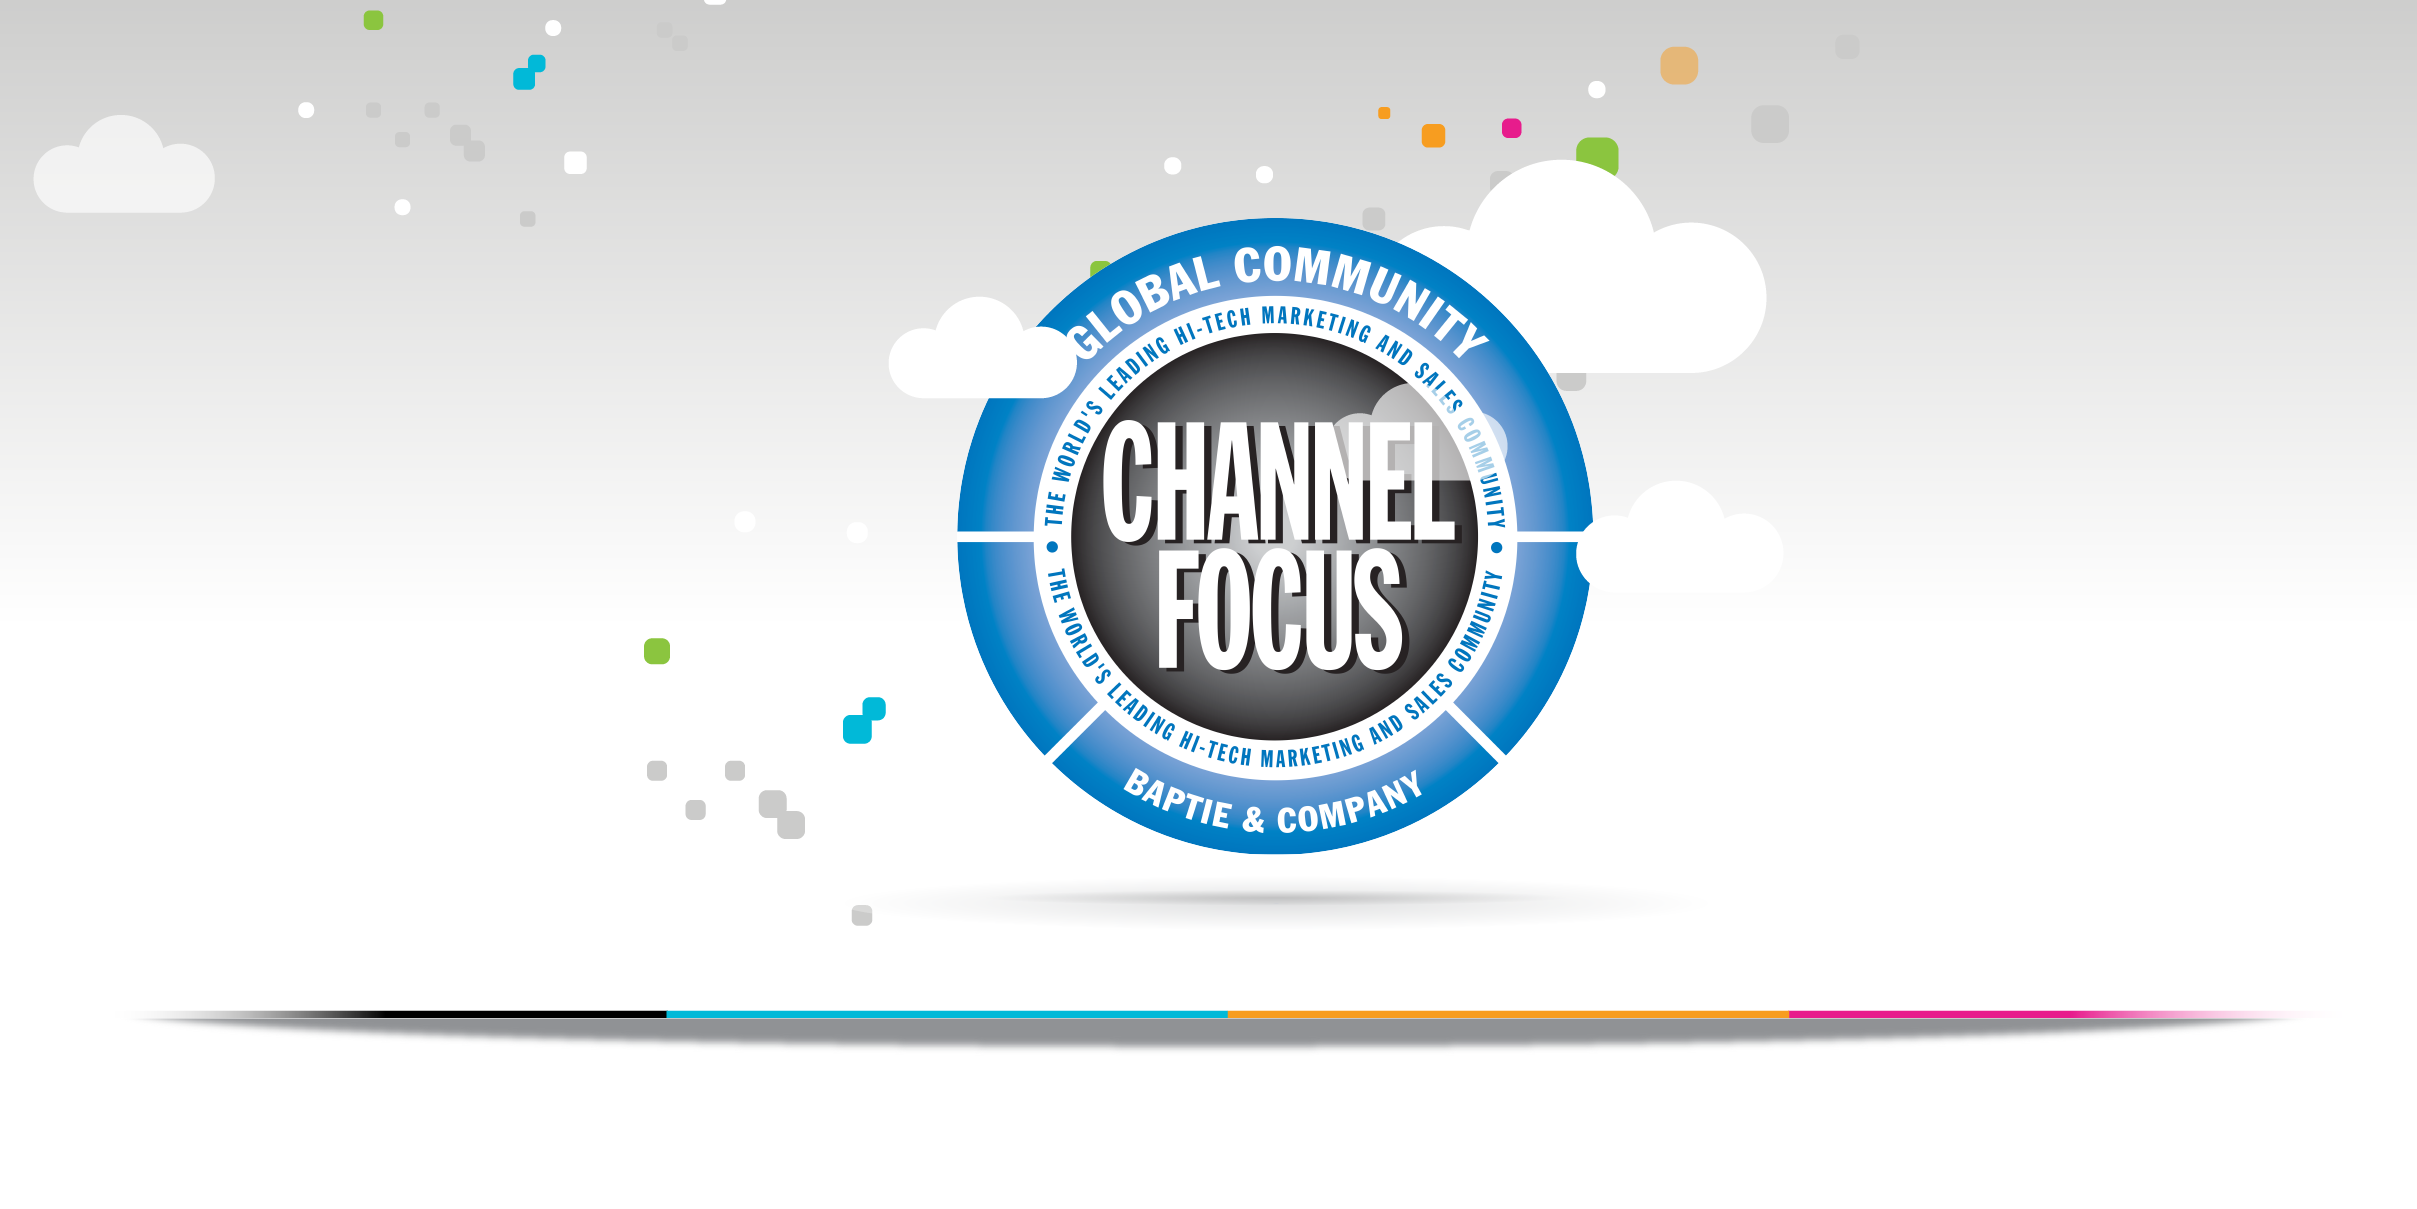 Blog about the top 3 takeaways from channel focus virtual 2022